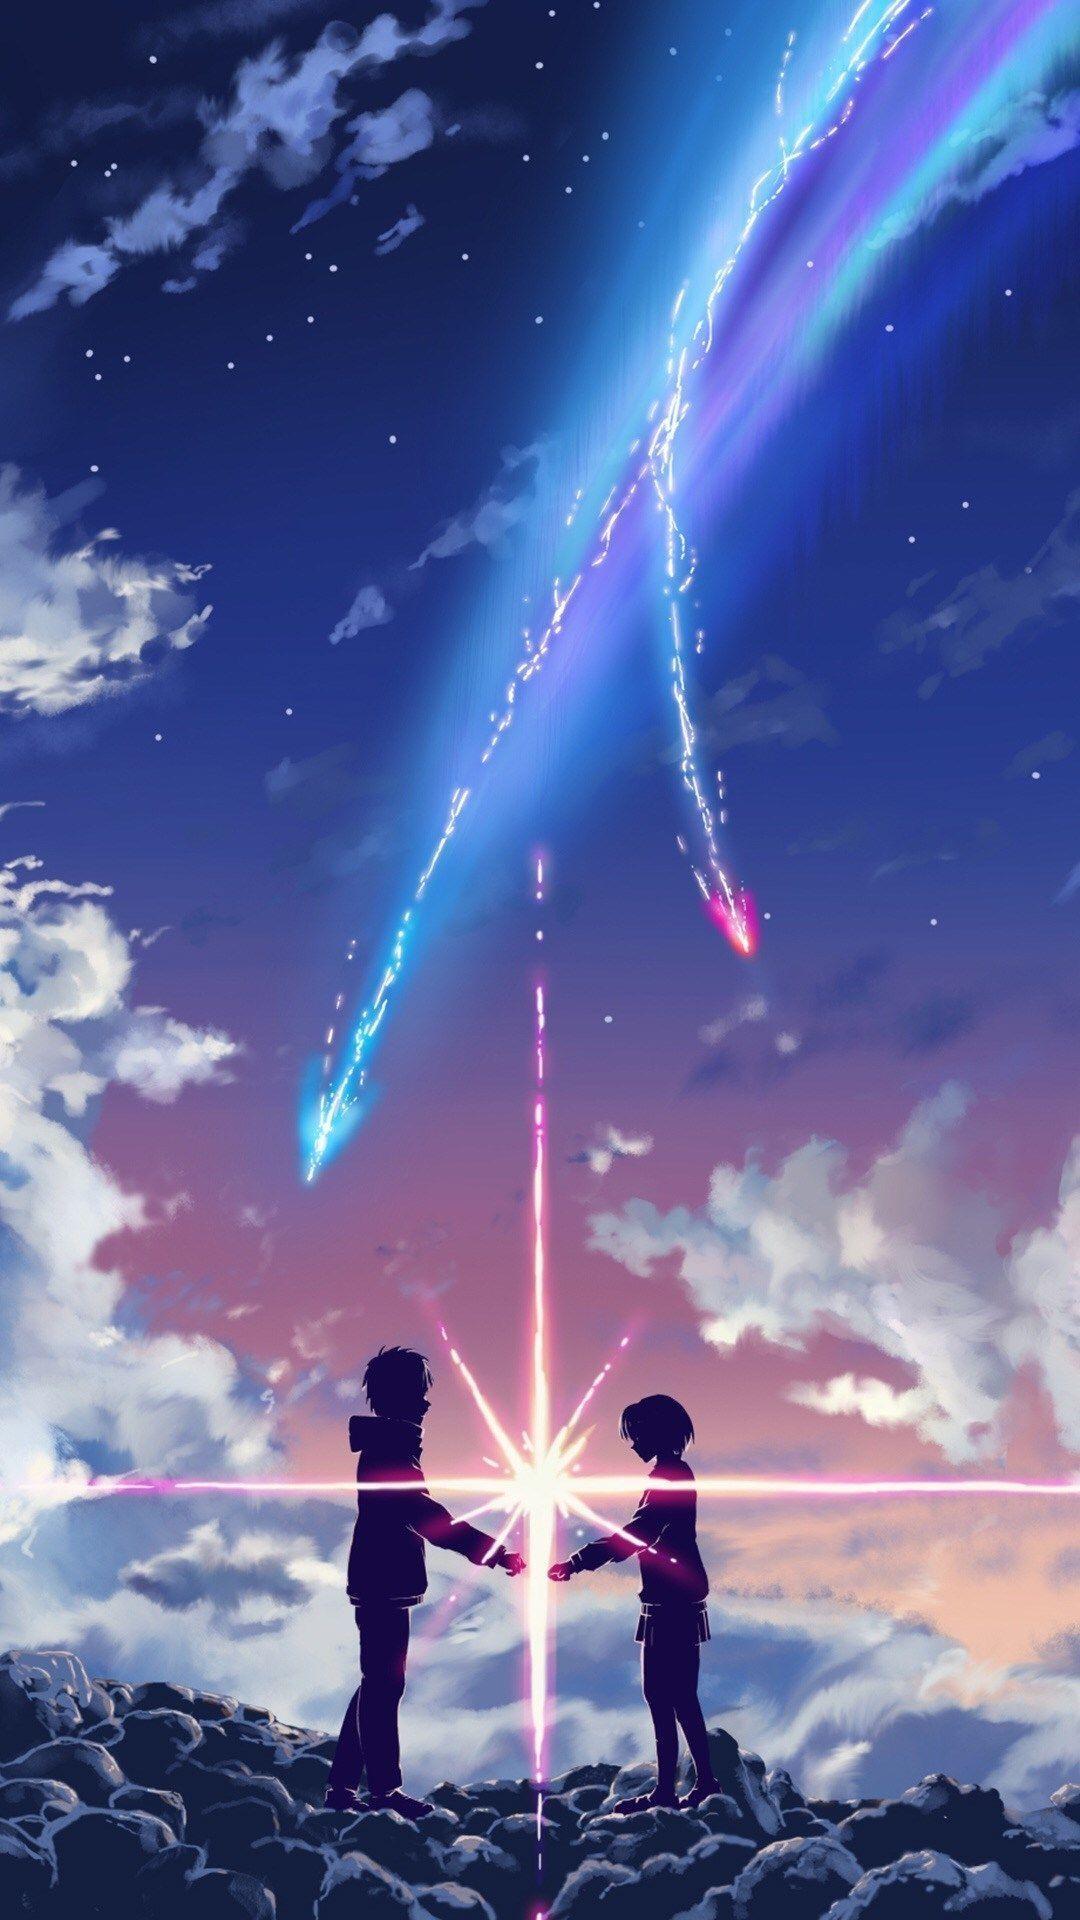 Pastel Aesthetic Anime HD Wallpaper (Desktop Background / Android / iPhone) (1080p, 4k) (1080x1920) (2020)